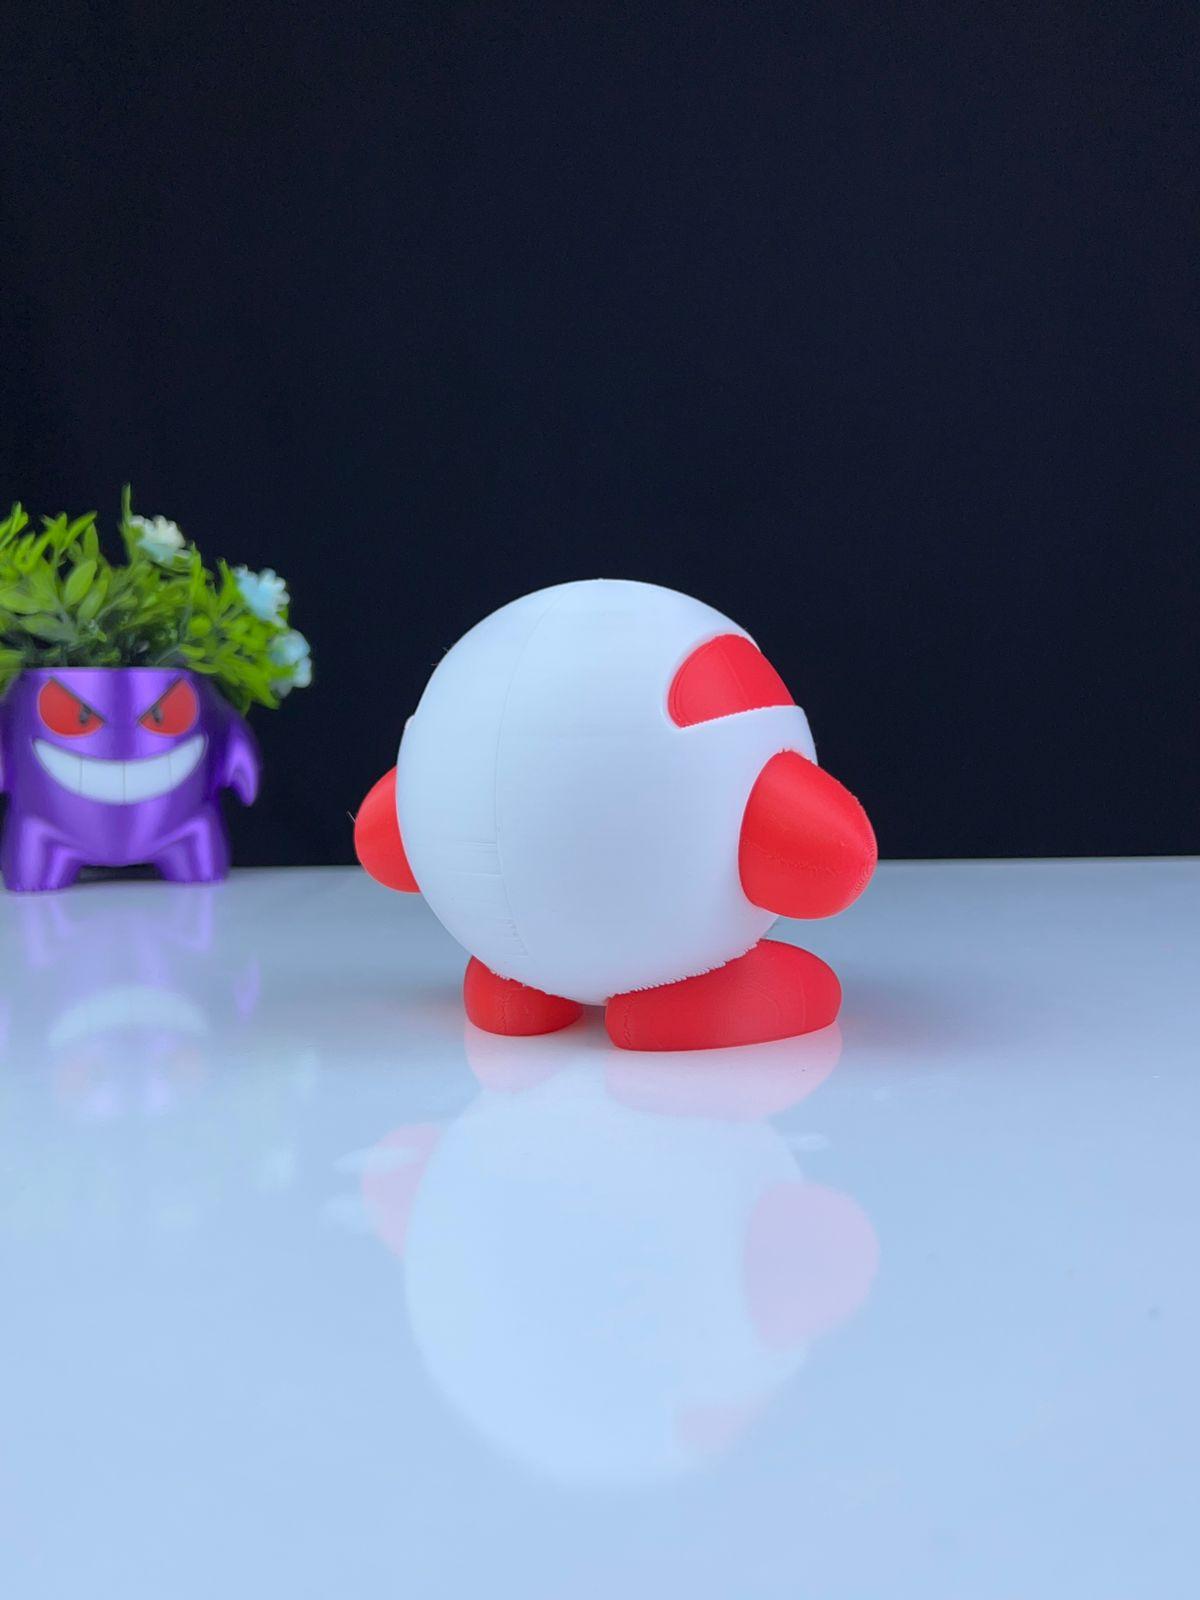 Colosal Kirby - Multipart 3d model